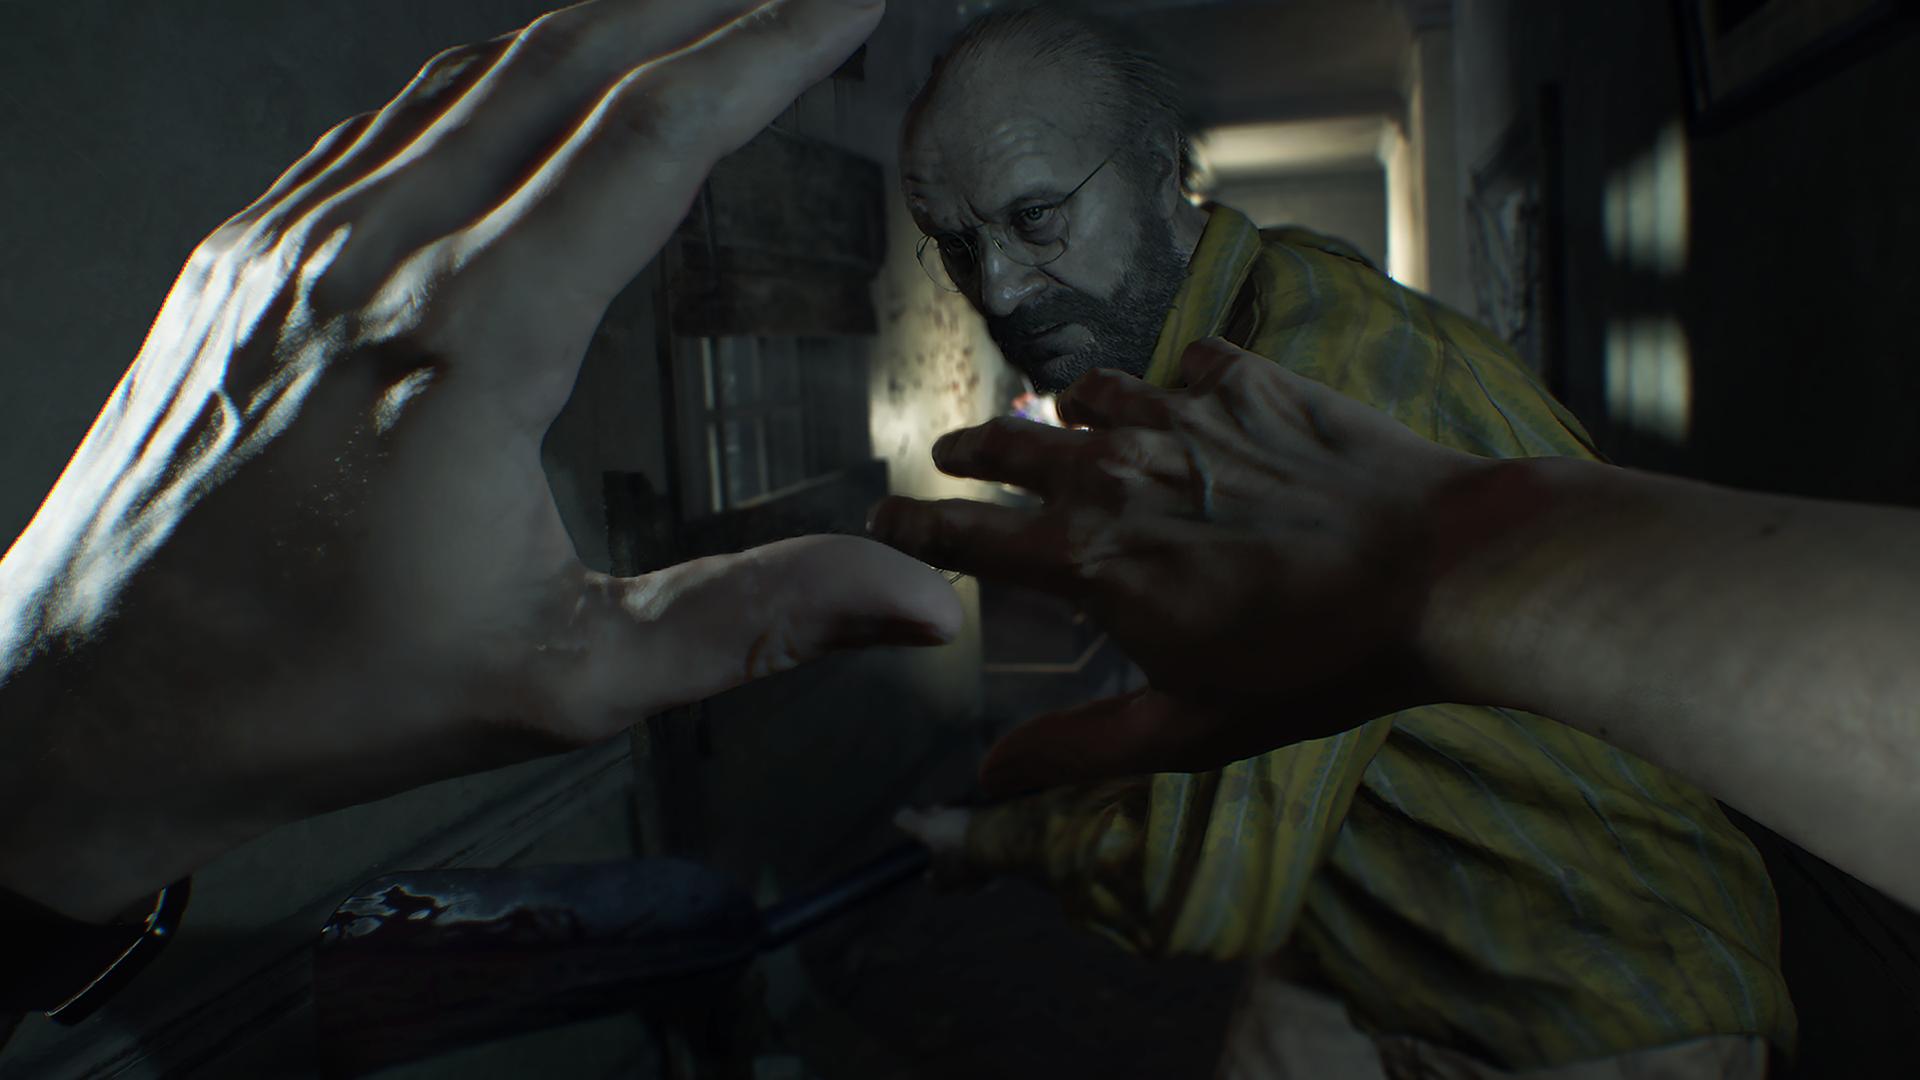 Resident Evil 7 two player